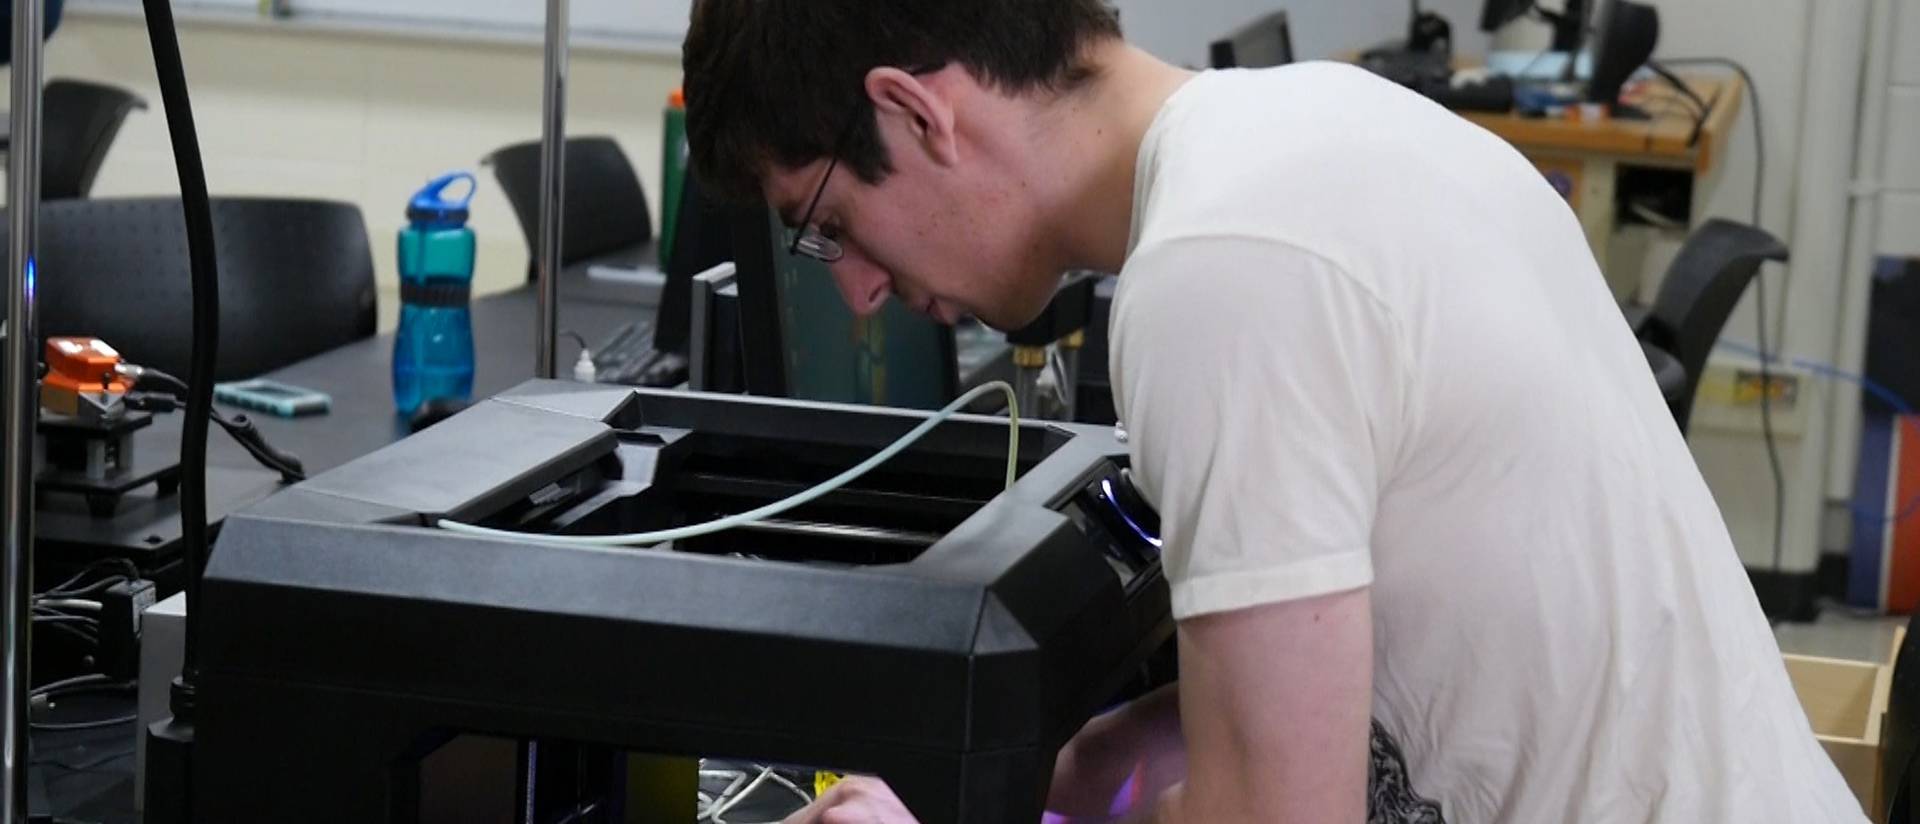 Gavriel Deprenger-Gottfried works with the 3-D printer, one of the many state-of-the-art instruments found in UW-Eau Claire's Materials Science Center. 